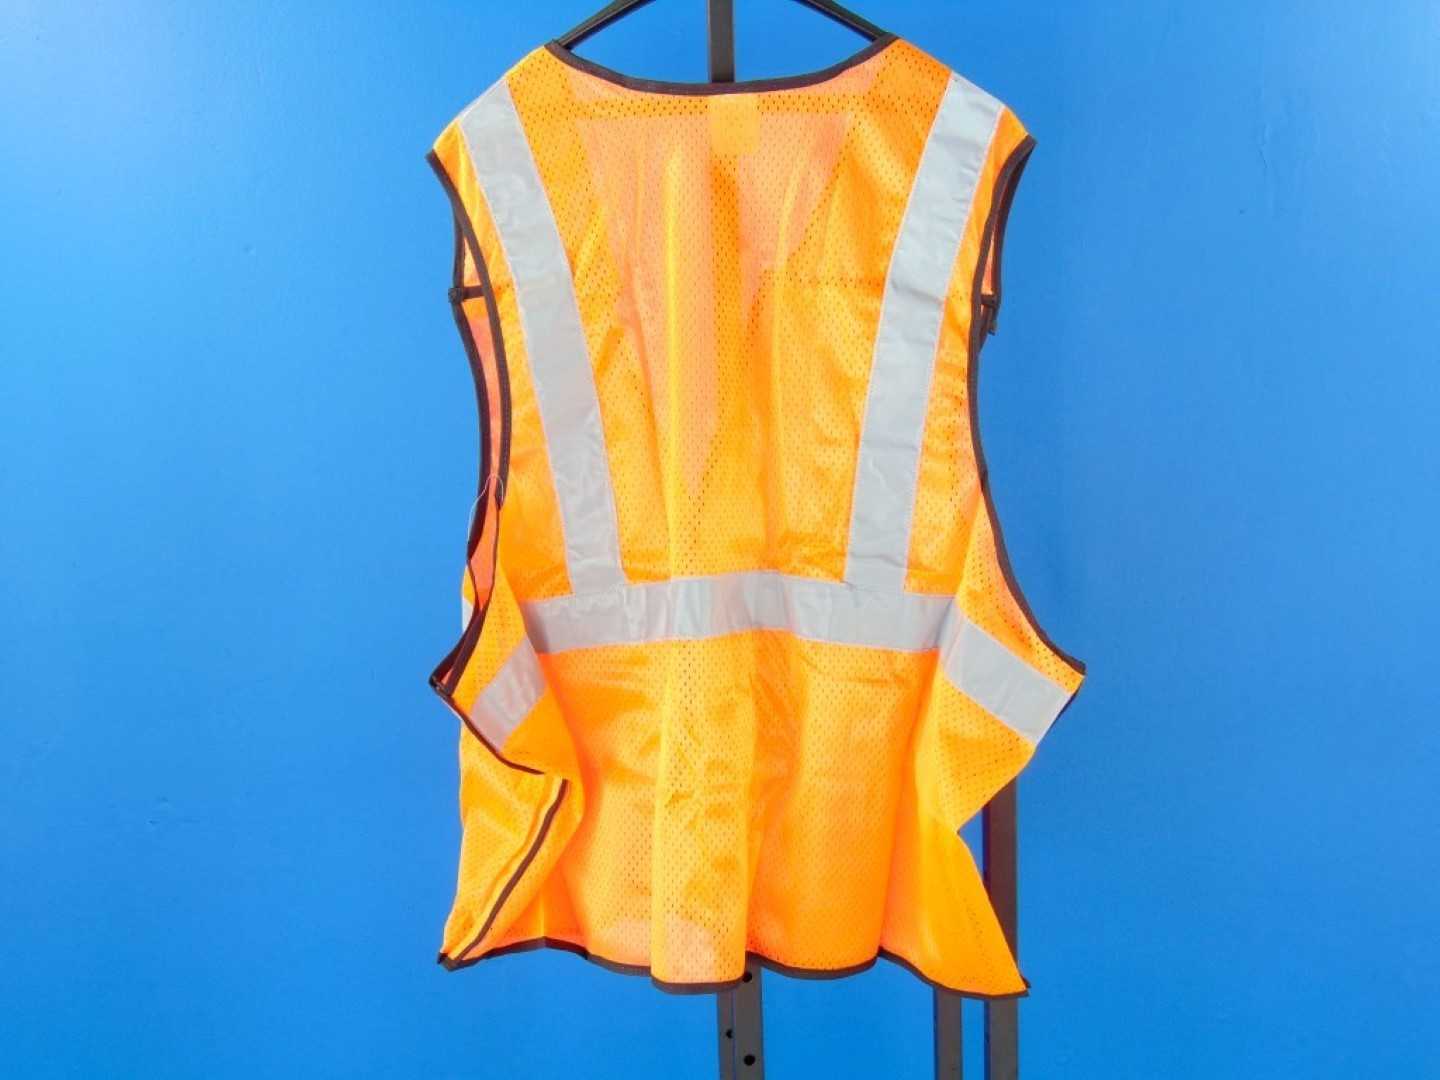 Poly Mesh ANSI/ISEA 107-2004 Comp. Safety Vest Reflective Breakaway 3XL